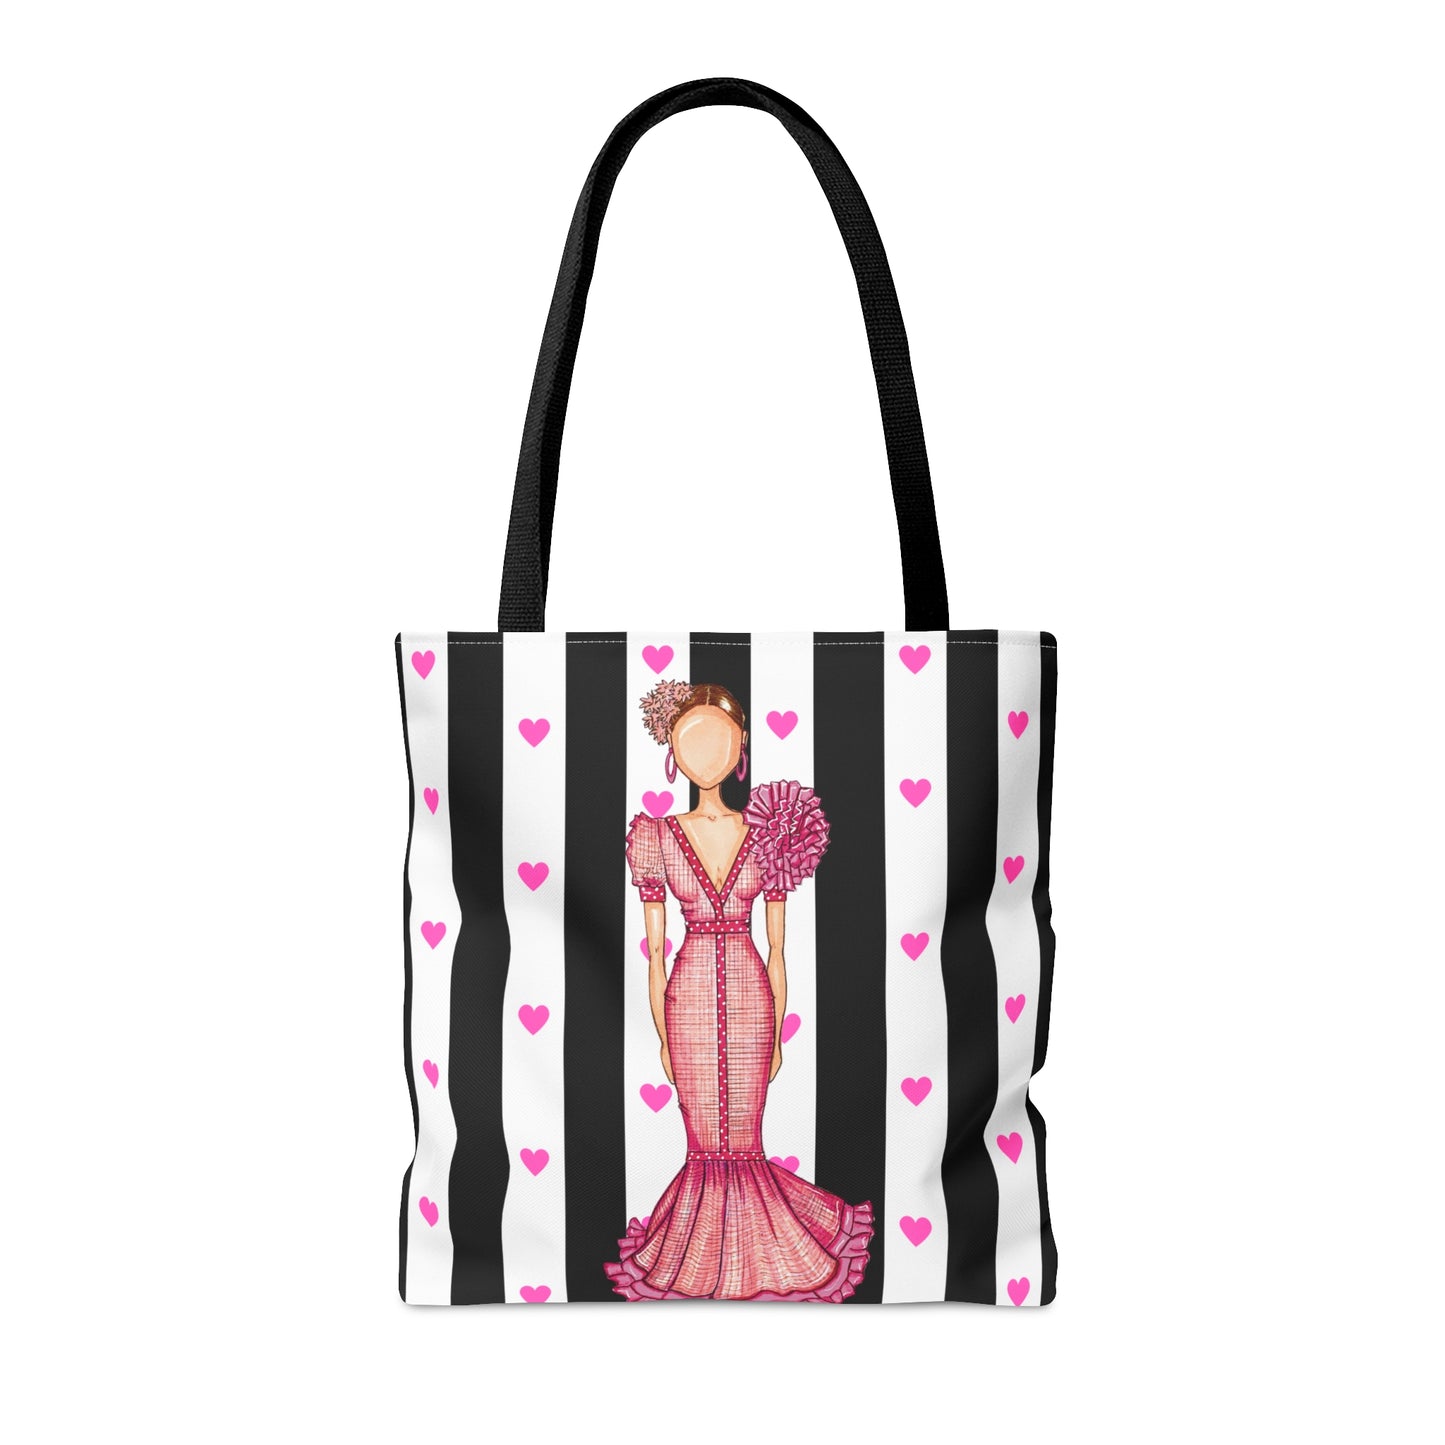 a black and white striped bag with a woman in a pink dress